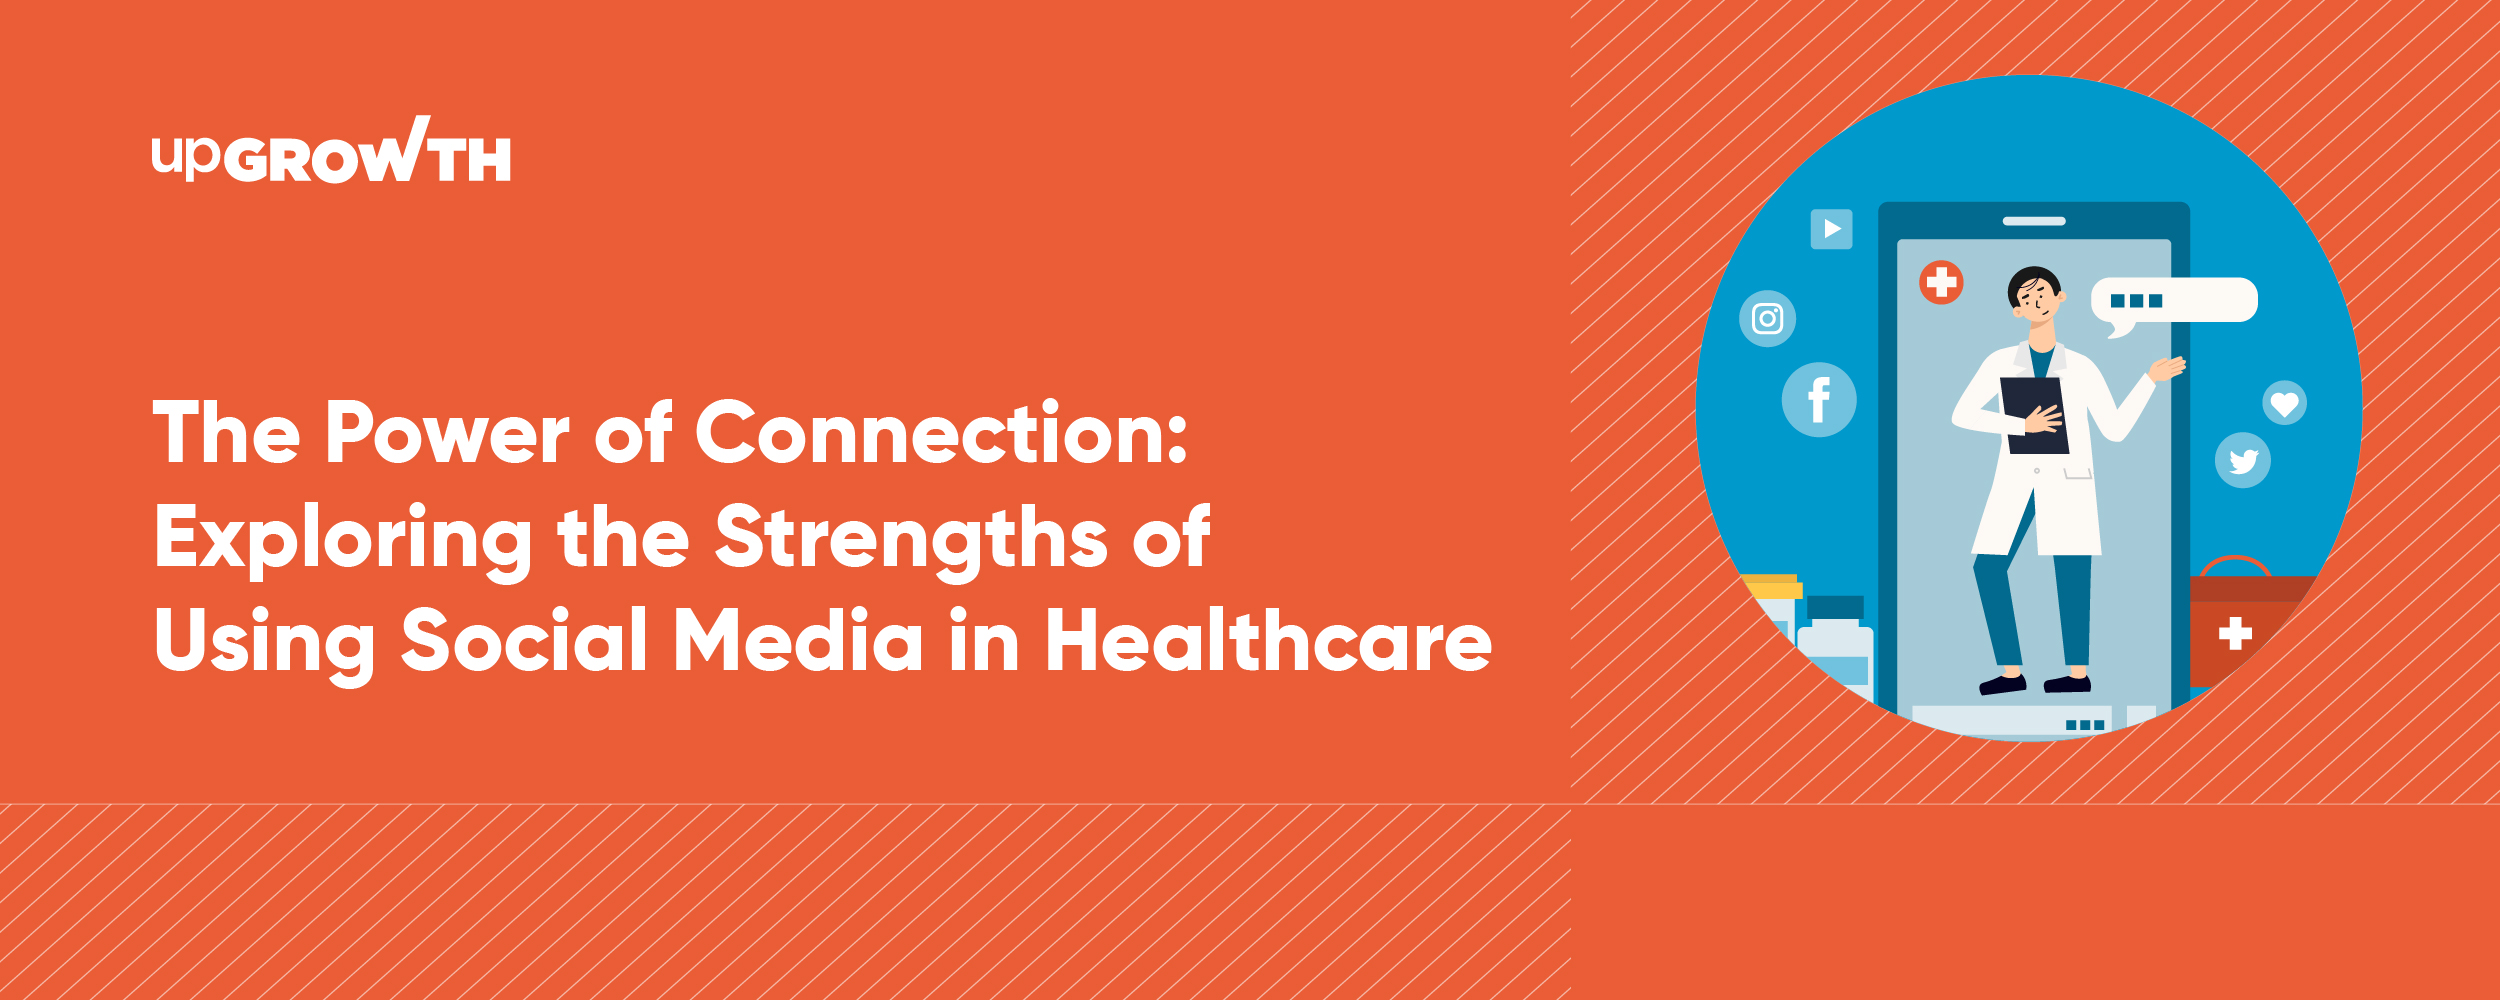 The Power of Connection: Exploring the Strengths of Using Social Media in Healthcare